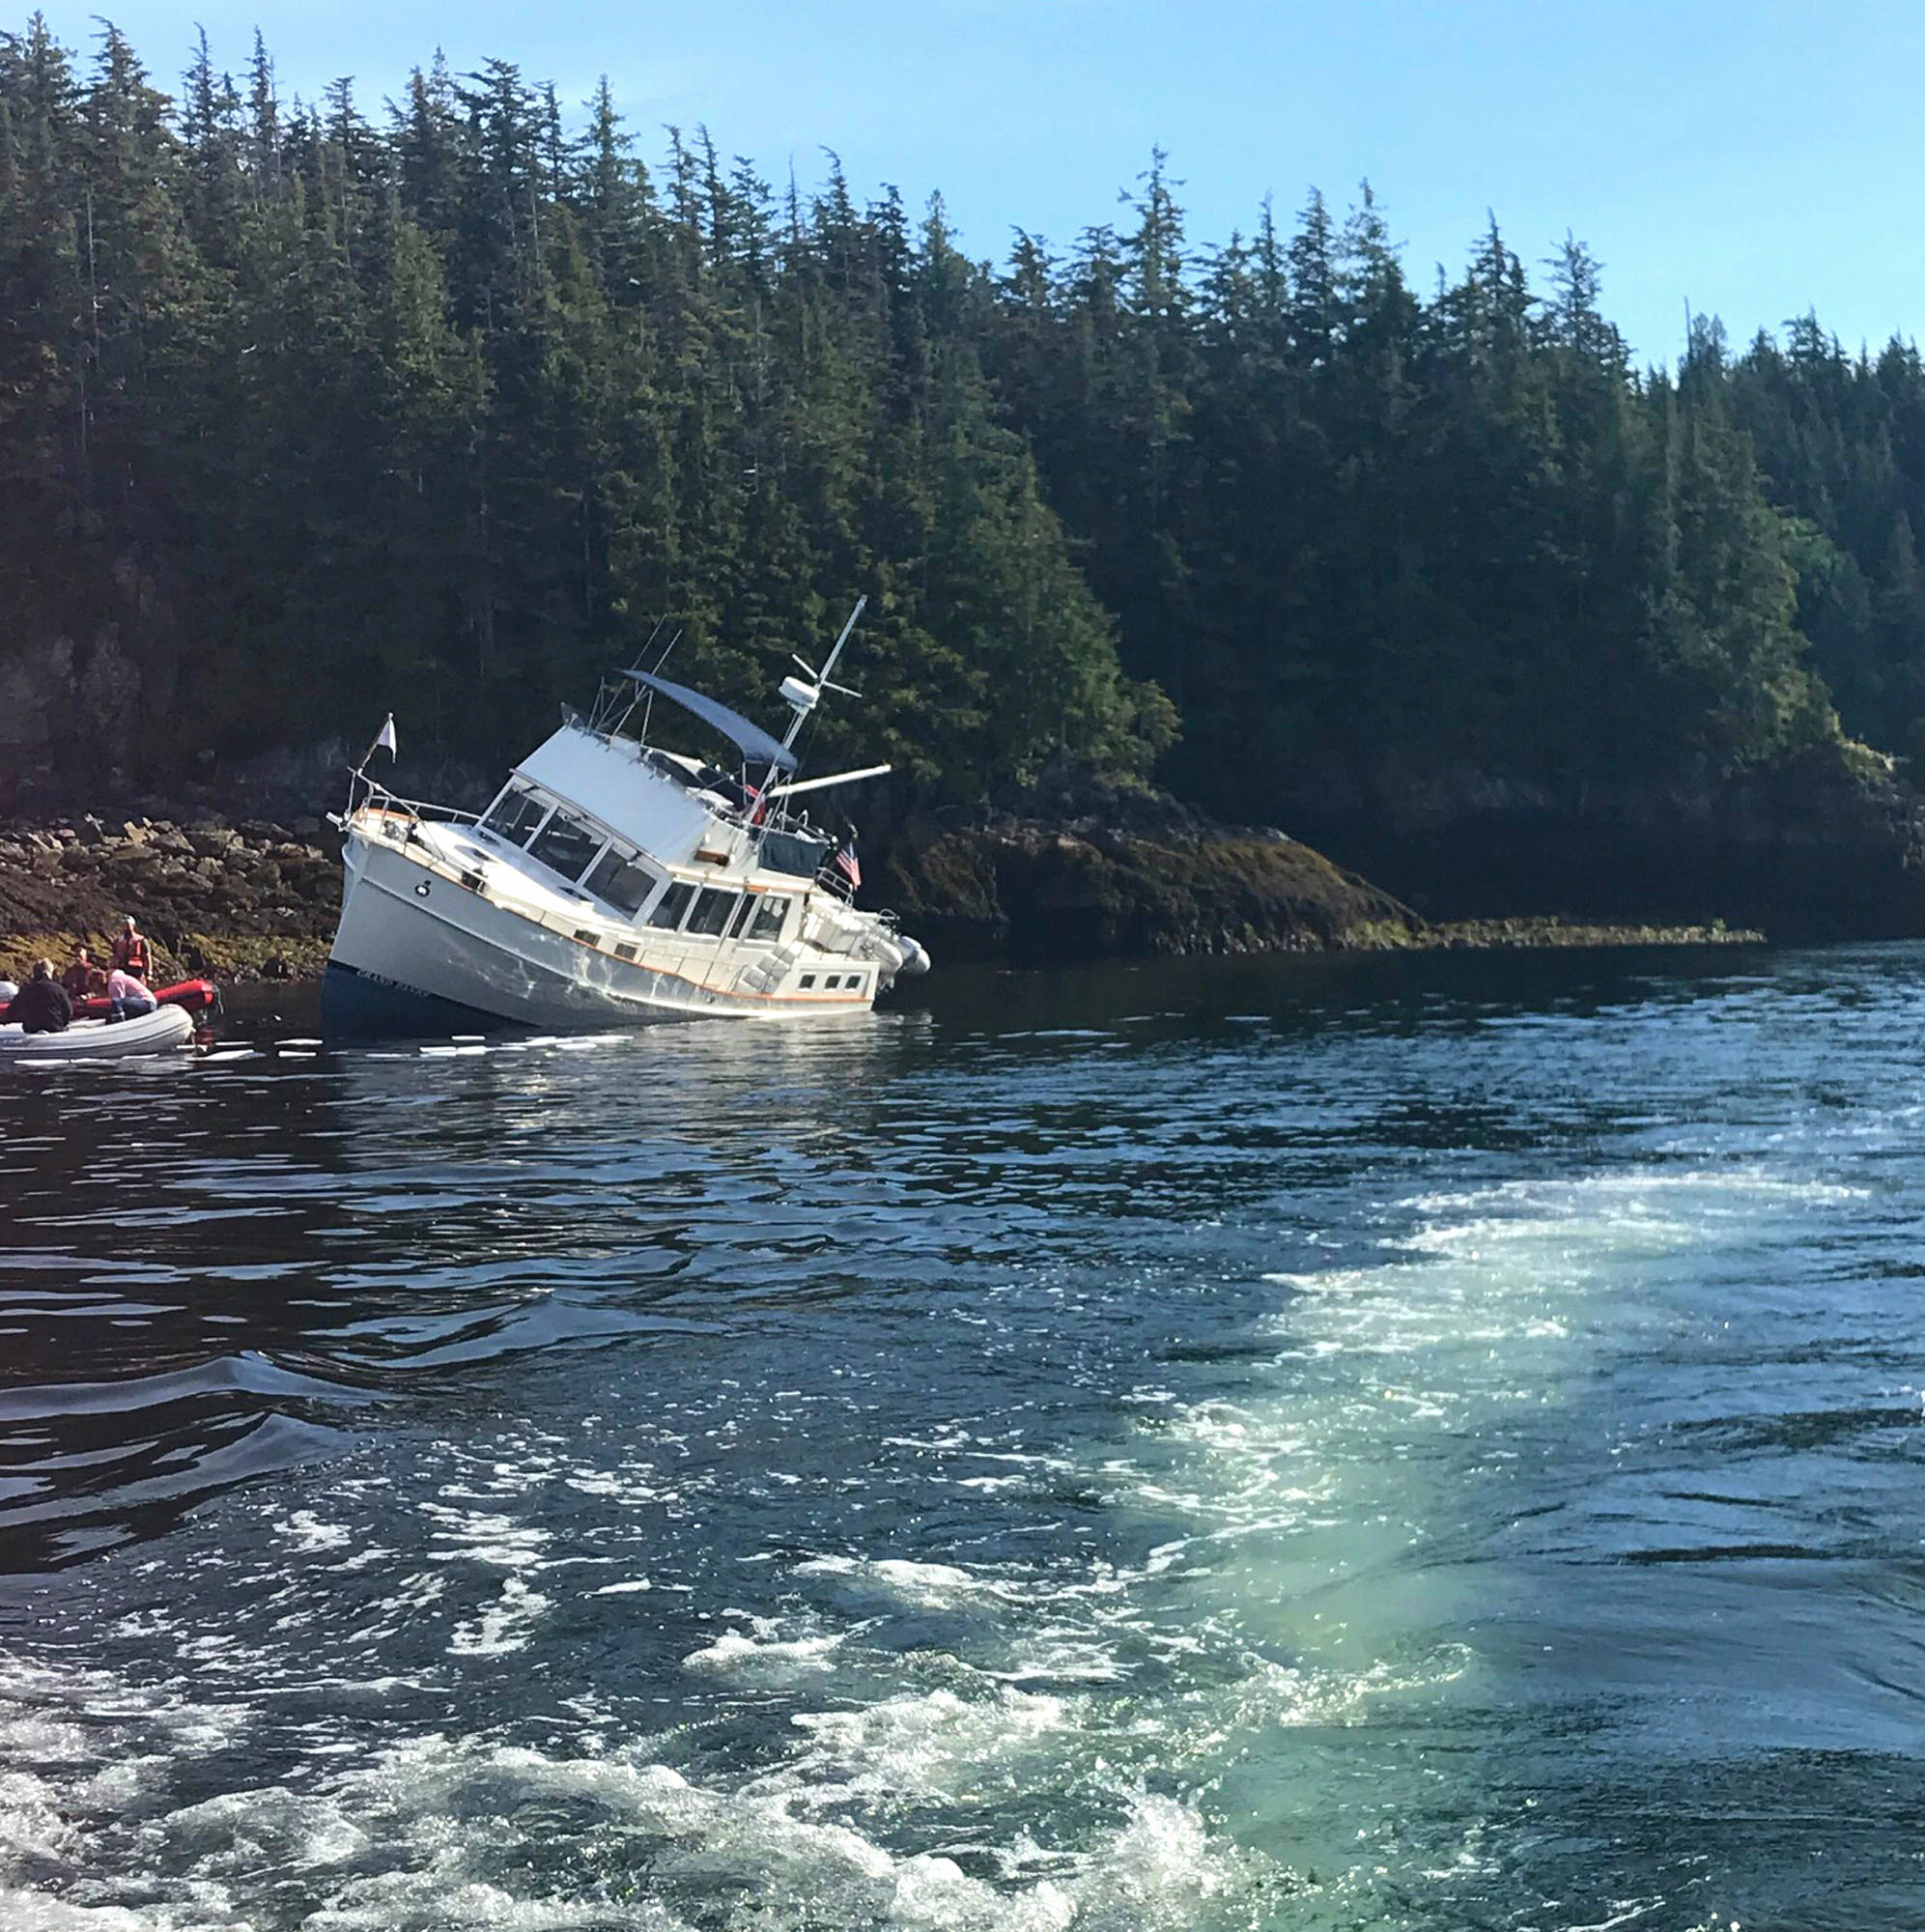 Non-local boat misled by a drifting buoy marker. (Robin Neilson | Capital City Weekly)